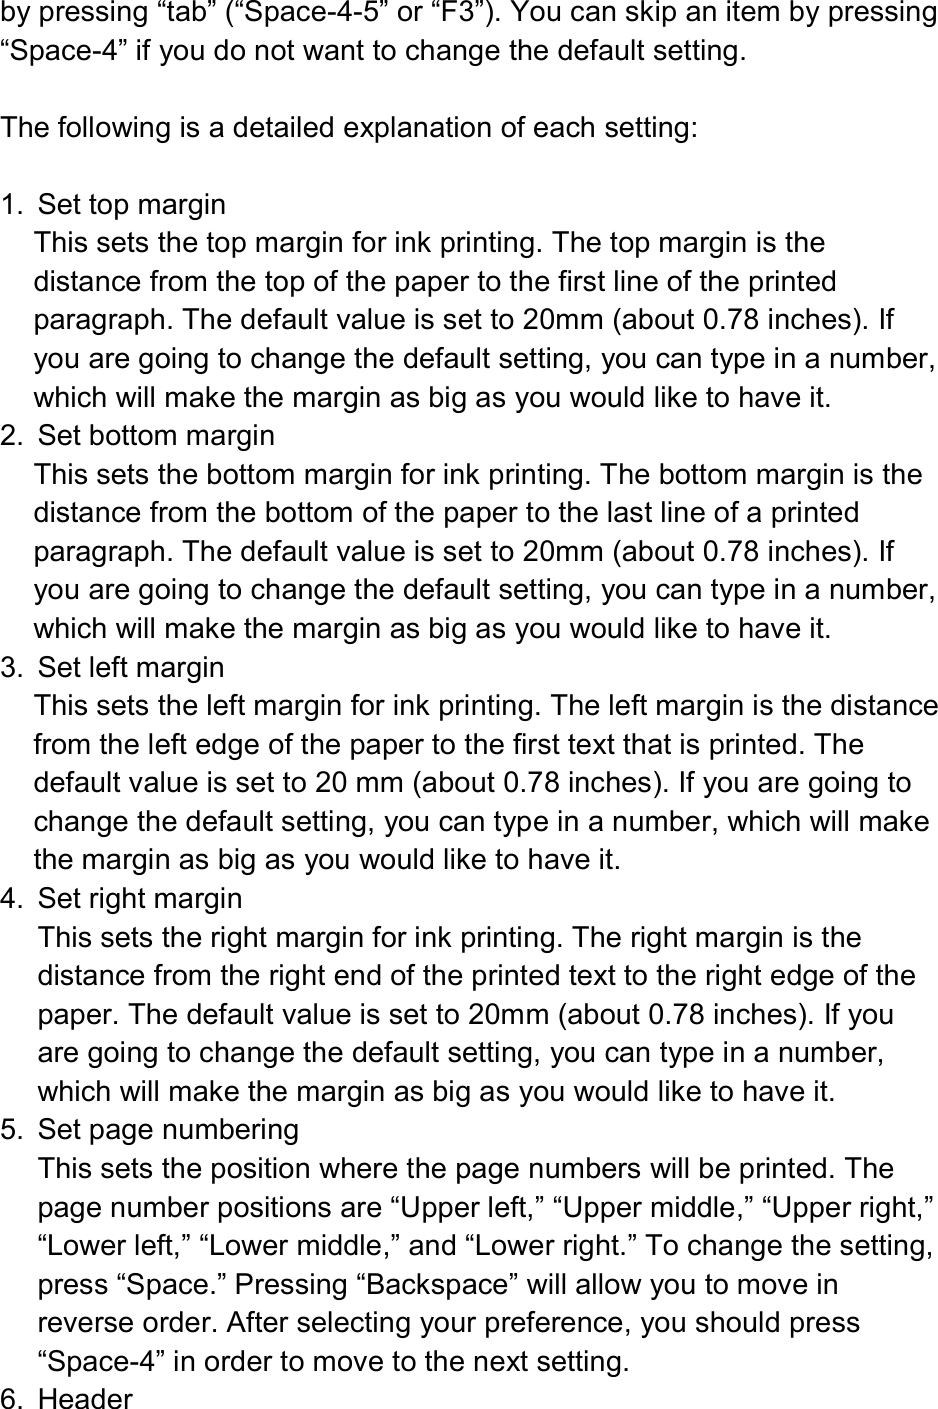  by pressing “tab” (“Space-4-5” or “F3”). You can skip an item by pressing “Space-4” if you do not want to change the default setting.  The following is a detailed explanation of each setting:  1.  Set top margin This sets the top margin for ink printing. The top margin is the distance from the top of the paper to the first line of the printed paragraph. The default value is set to 20mm (about 0.78 inches). If you are going to change the default setting, you can type in a number, which will make the margin as big as you would like to have it. 2.  Set bottom margin This sets the bottom margin for ink printing. The bottom margin is the distance from the bottom of the paper to the last line of a printed paragraph. The default value is set to 20mm (about 0.78 inches). If you are going to change the default setting, you can type in a number, which will make the margin as big as you would like to have it. 3.  Set left margin This sets the left margin for ink printing. The left margin is the distance from the left edge of the paper to the first text that is printed. The default value is set to 20 mm (about 0.78 inches). If you are going to change the default setting, you can type in a number, which will make the margin as big as you would like to have it. 4.  Set right margin This sets the right margin for ink printing. The right margin is the distance from the right end of the printed text to the right edge of the paper. The default value is set to 20mm (about 0.78 inches). If you are going to change the default setting, you can type in a number, which will make the margin as big as you would like to have it. 5.  Set page numbering This sets the position where the page numbers will be printed. The page number positions are “Upper left,” “Upper middle,” “Upper right,” “Lower left,” “Lower middle,” and “Lower right.” To change the setting, press “Space.” Pressing “Backspace” will allow you to move in reverse order. After selecting your preference, you should press “Space-4” in order to move to the next setting. 6.  Header 